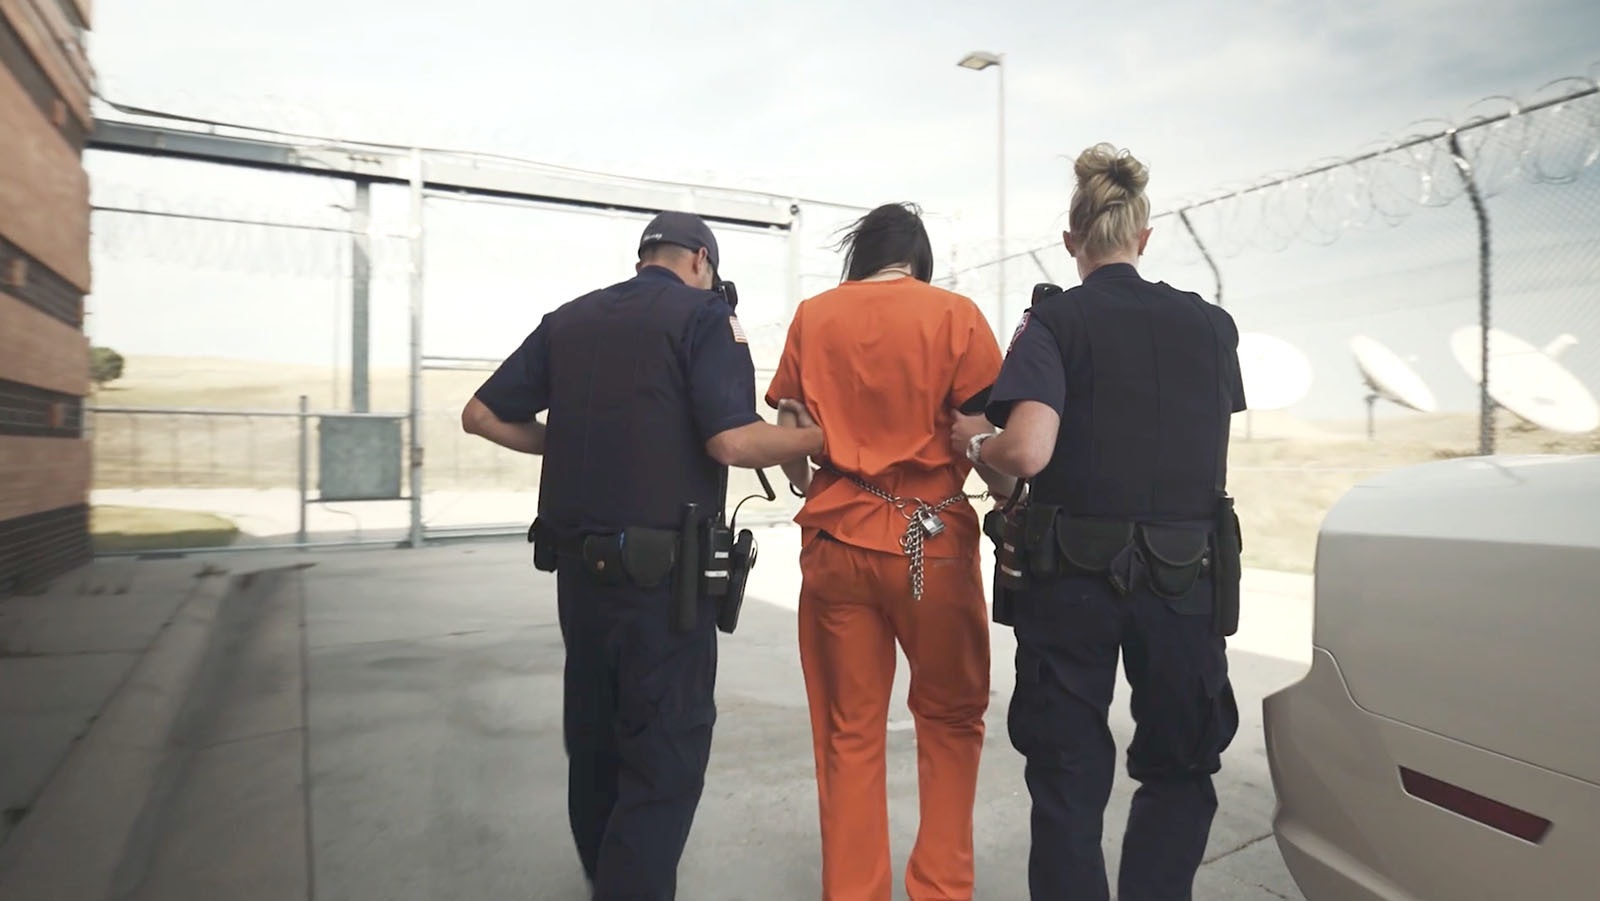 A pair of Wyoming Department of Corrections officers move an inmate.